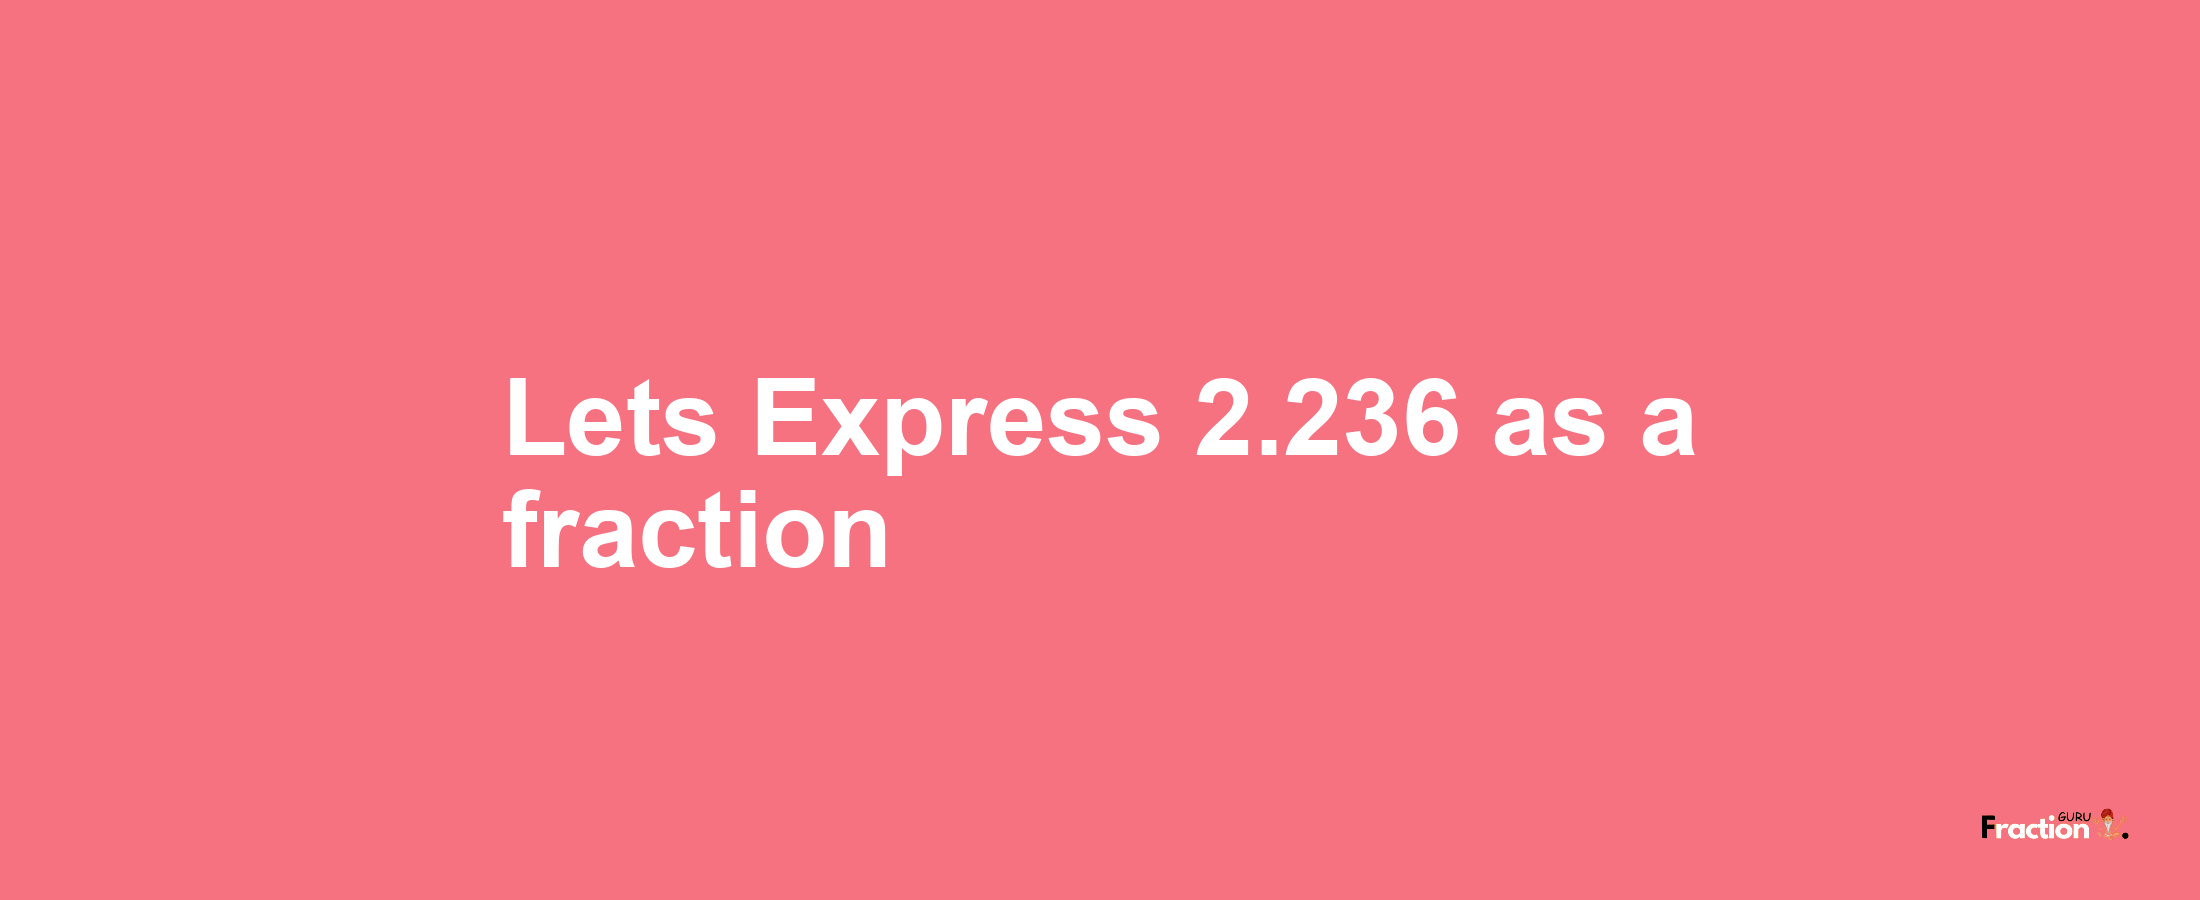 Lets Express 2.236 as afraction